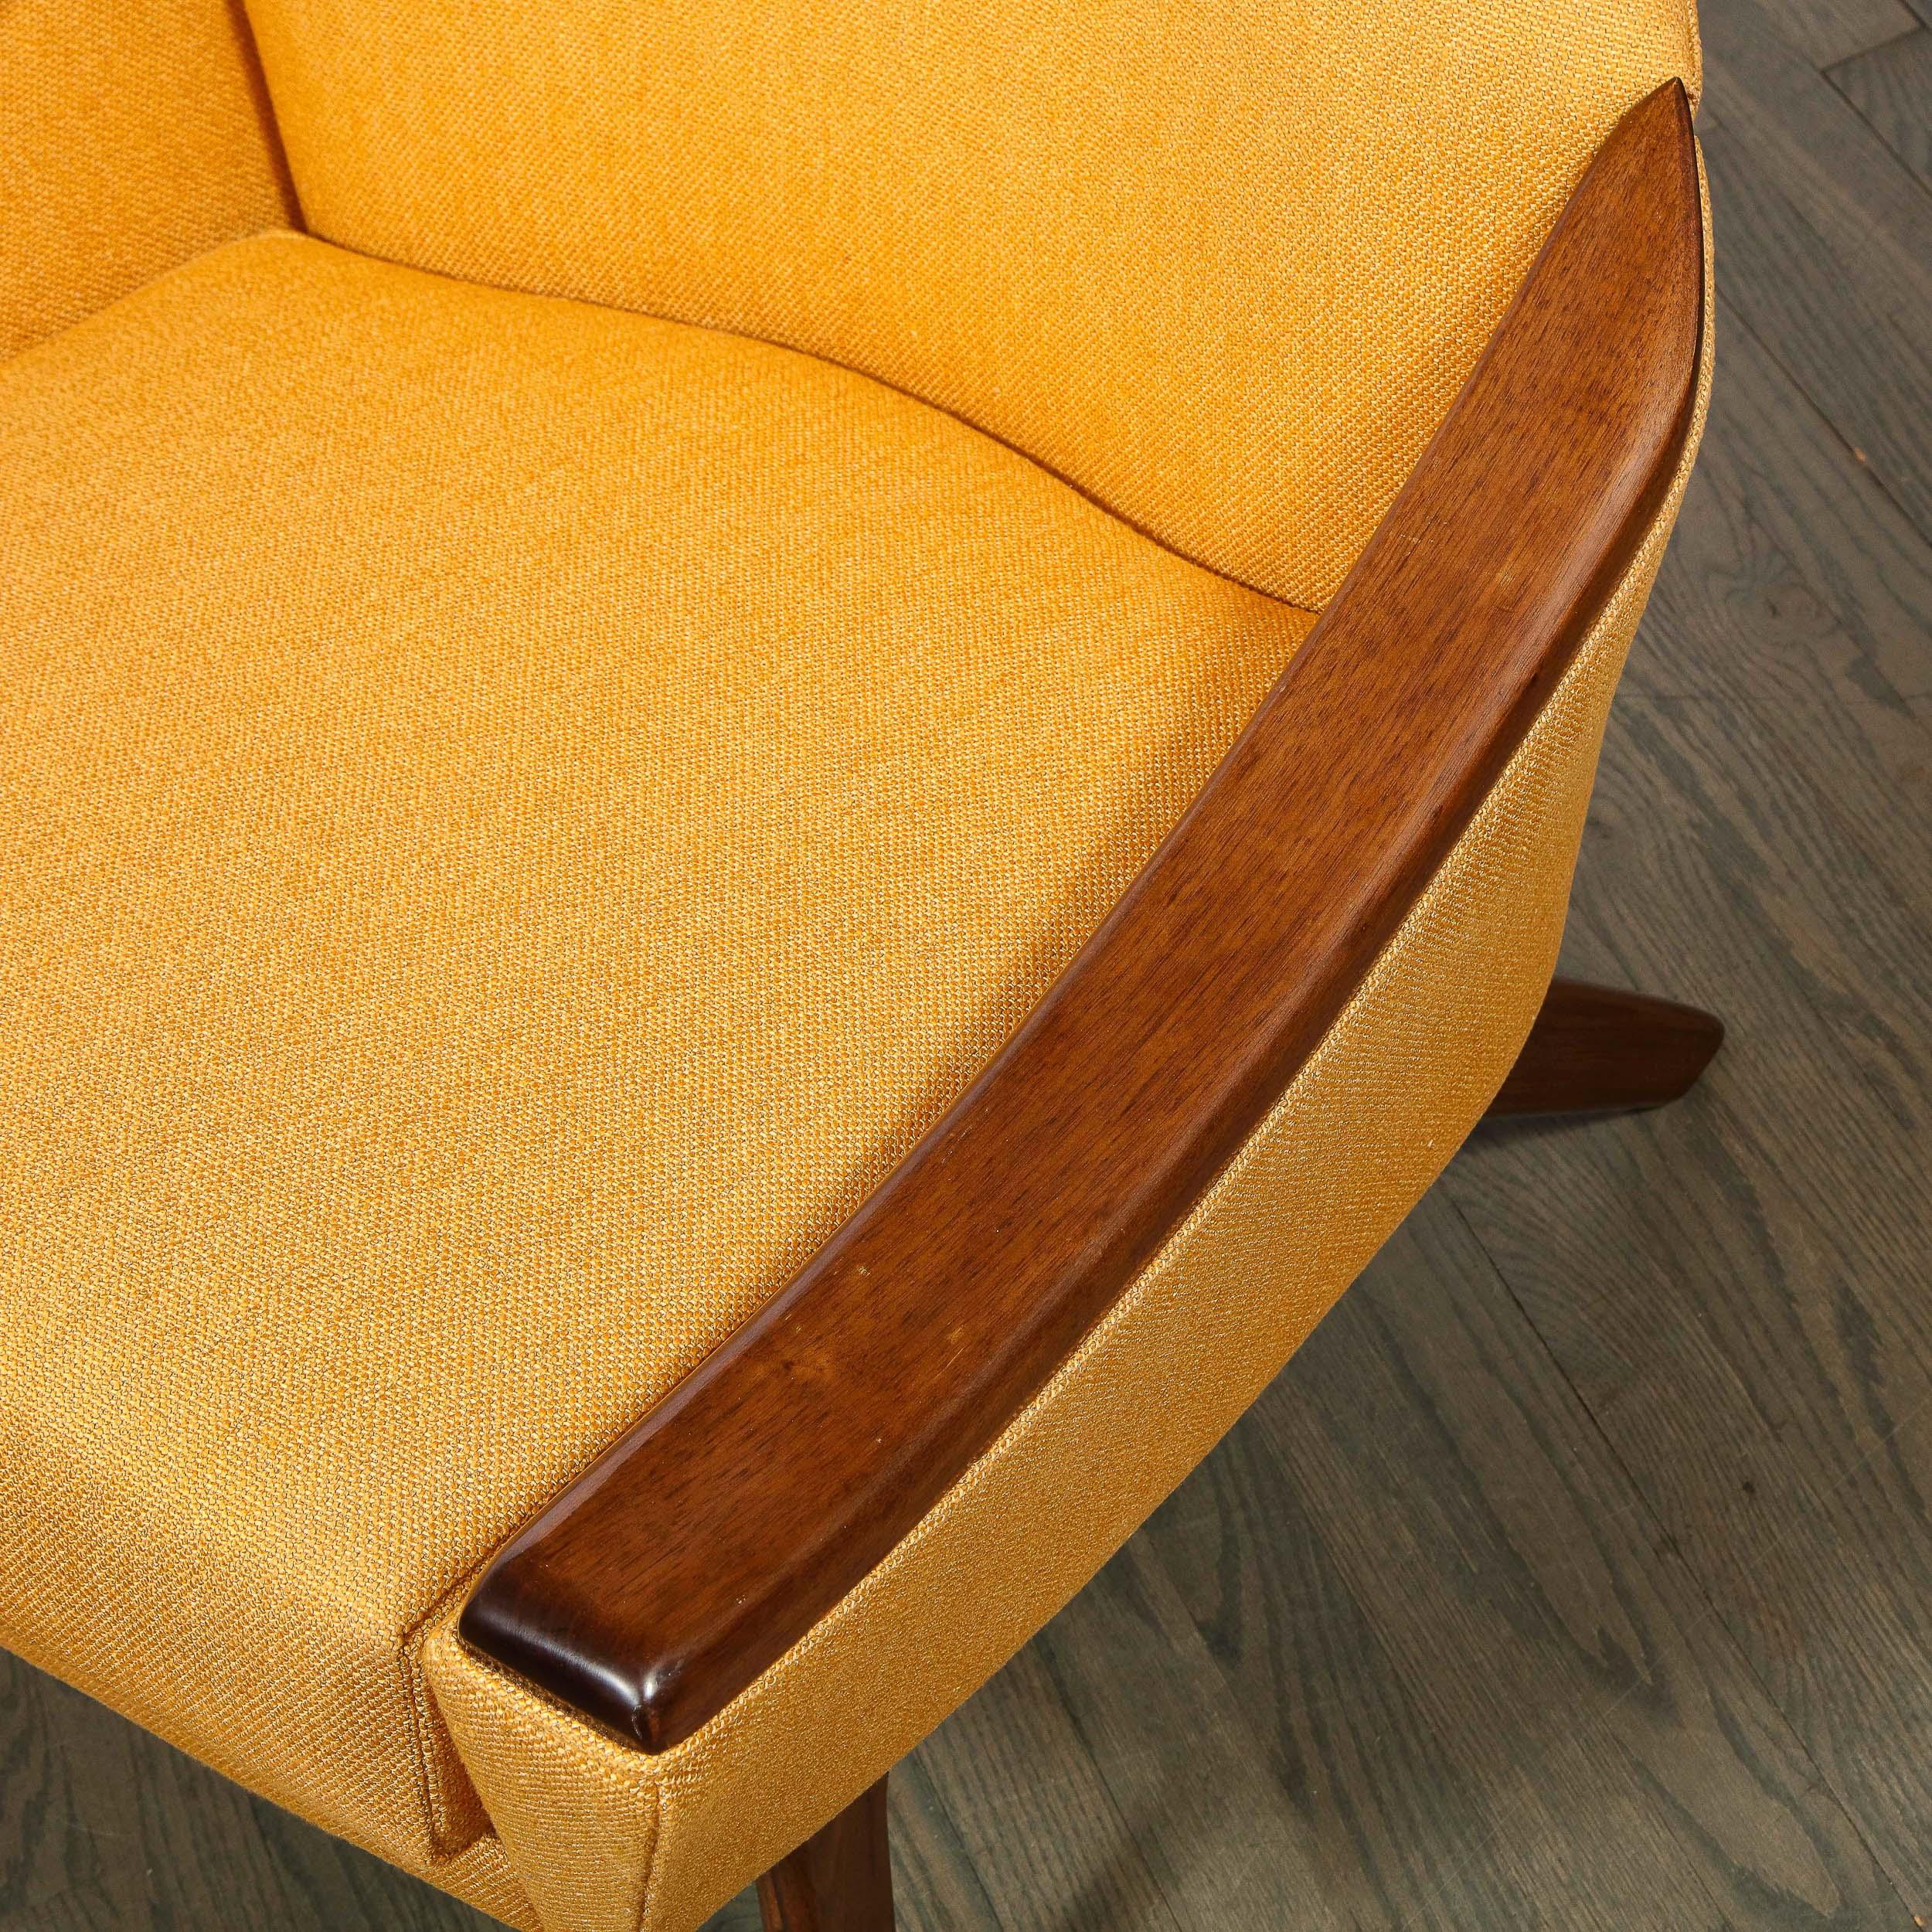 This elegant Mid-Century Modern arm chair was realized by the celebrated designer Adrian Pearsall circa 1960. It features button back detailing; concave arms; arched hind legs; and a sculptural apron all in hand rubbed walnut. With its dynamic form